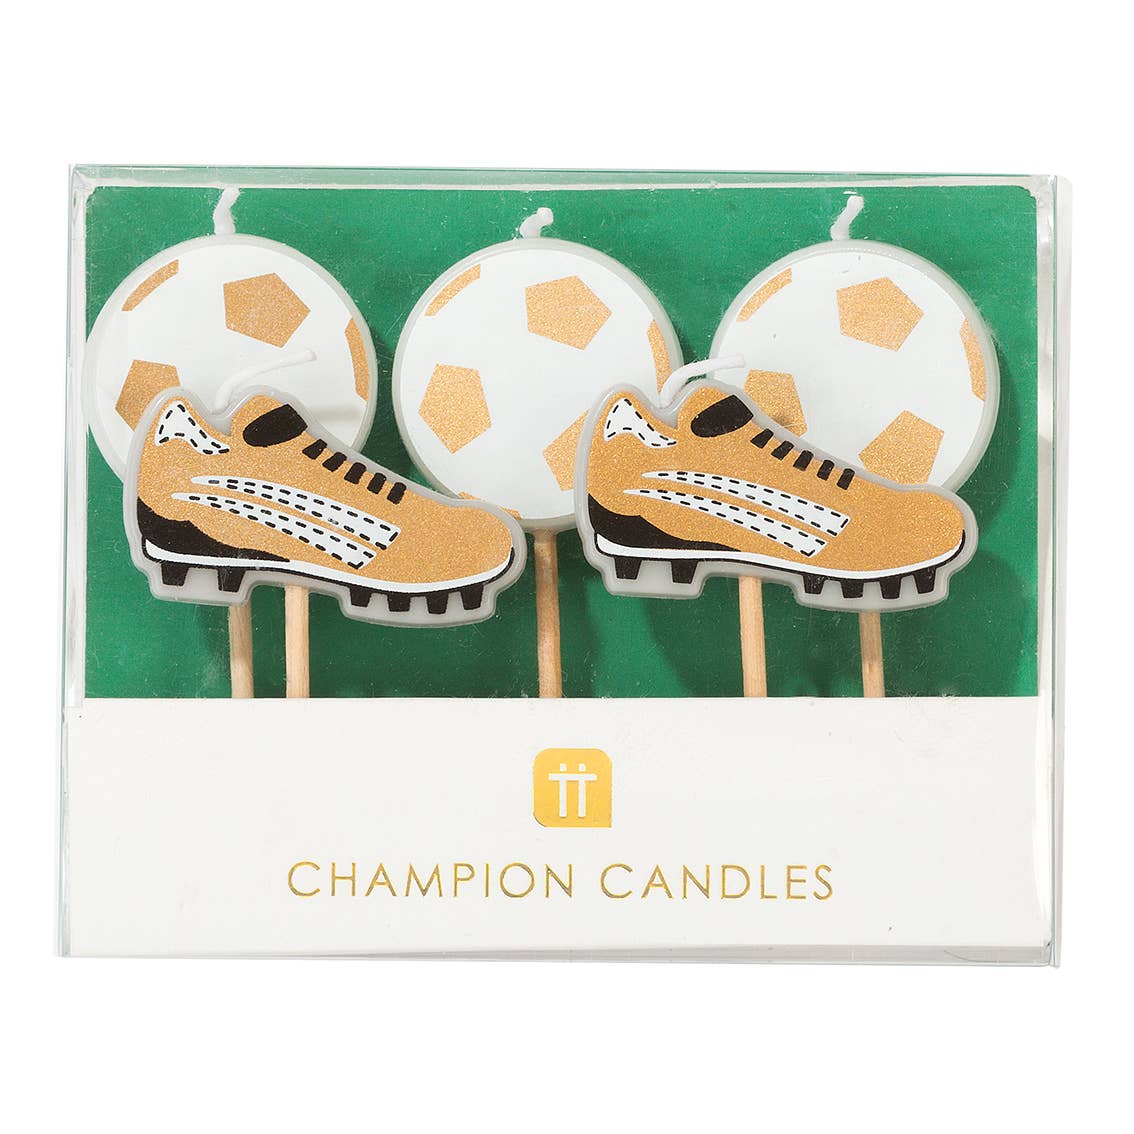 Soccer Candles - Pack of 5 Candles